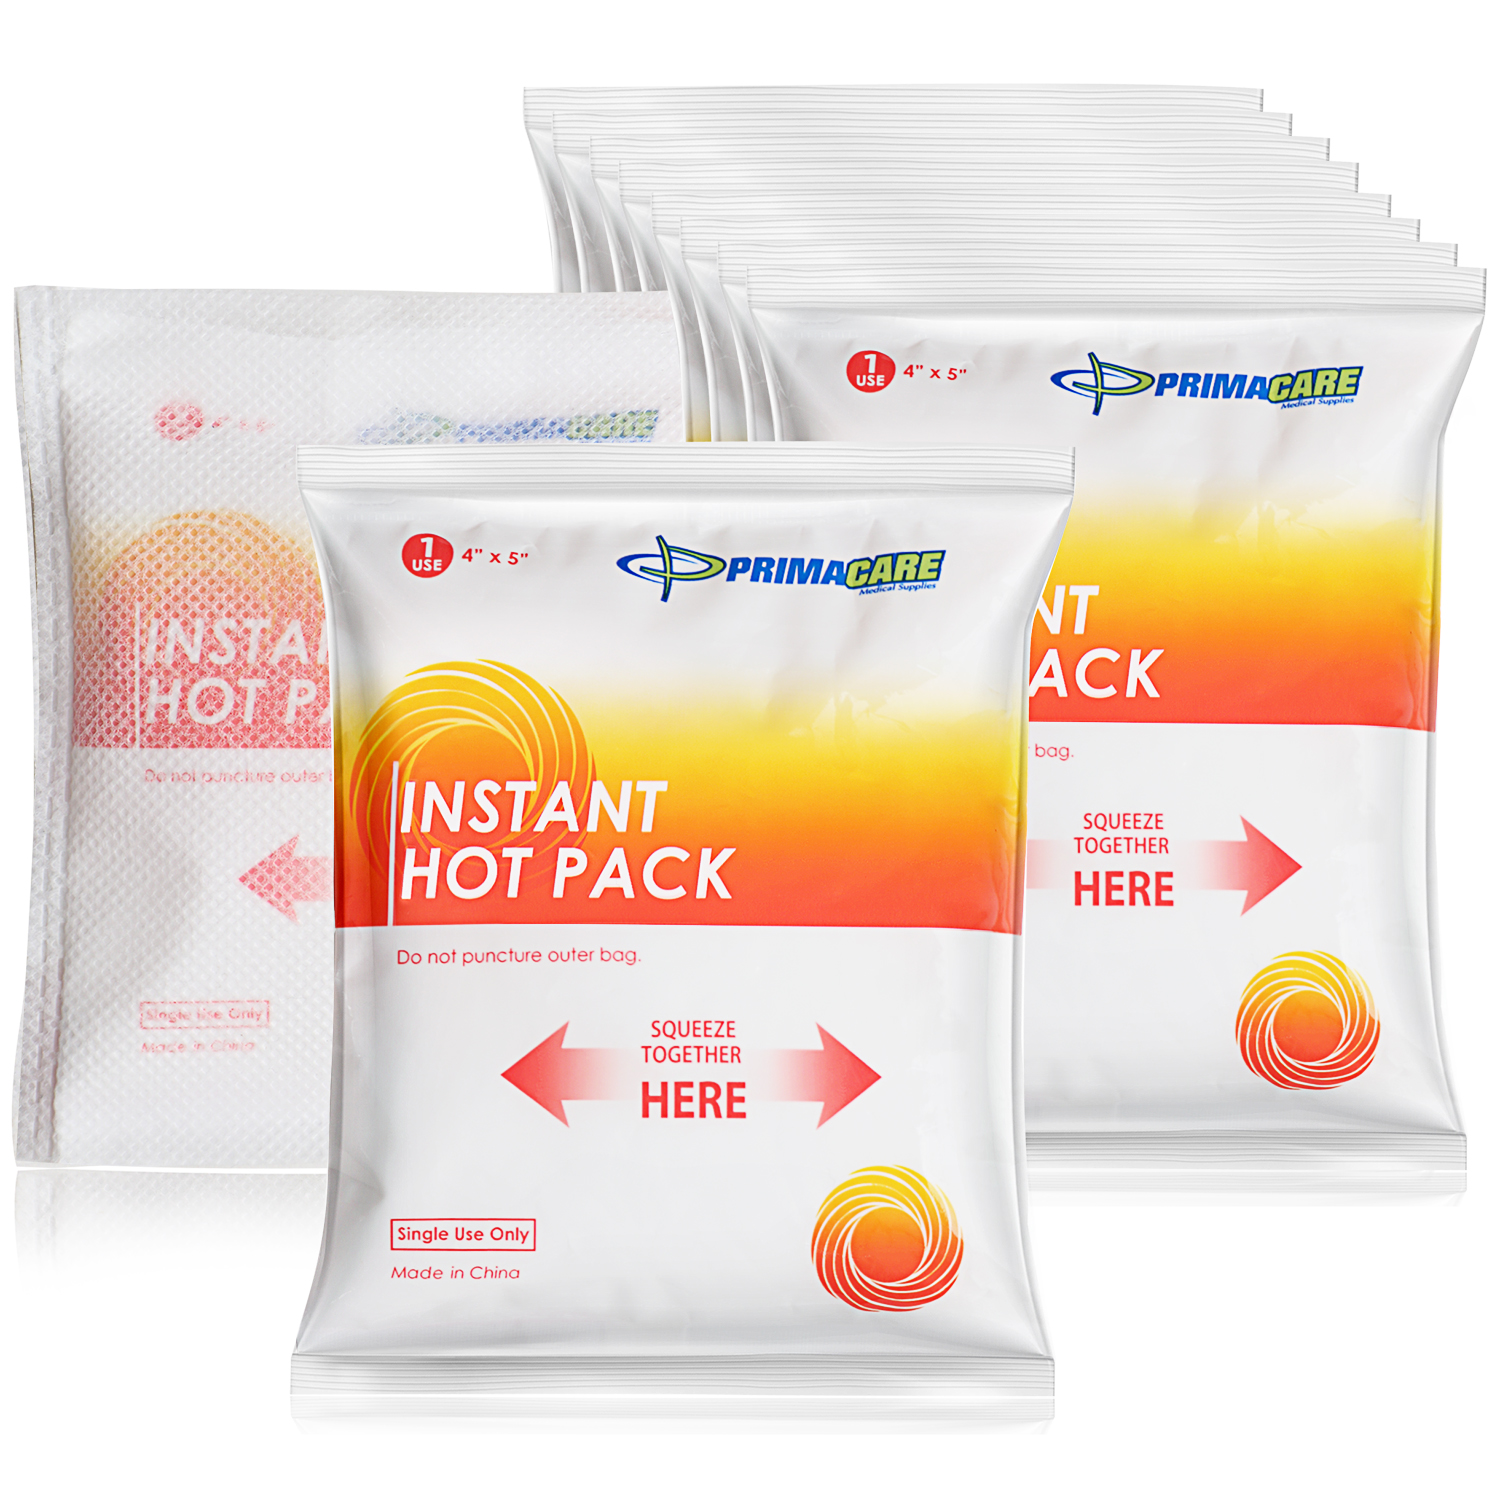 Primacare Medical Supplies » Cold / Hot Packs